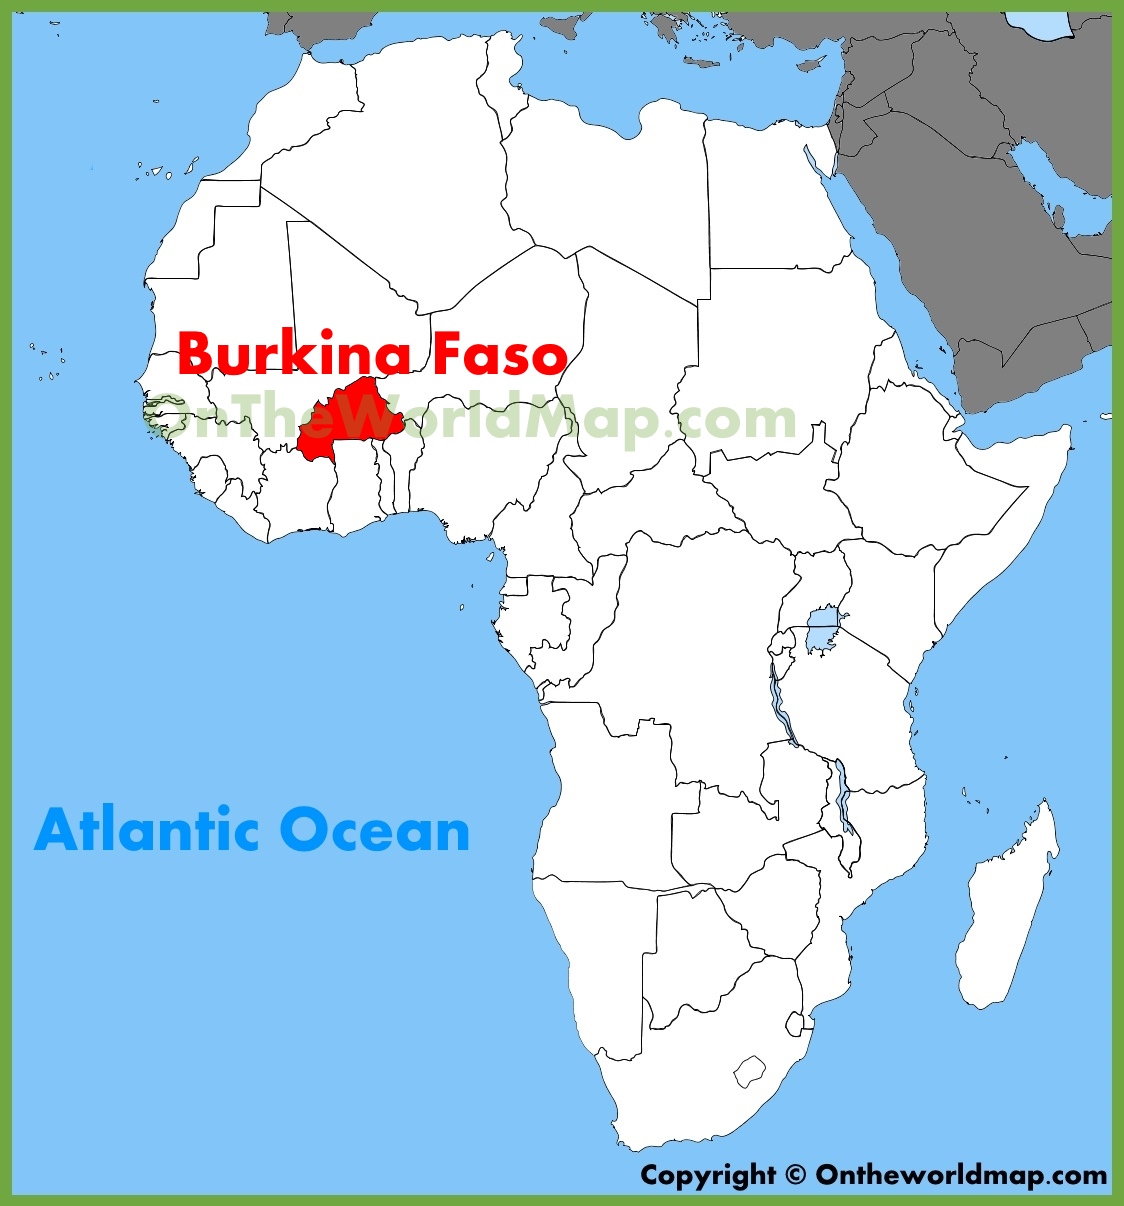 Burkina Faso Location On The Africa Map